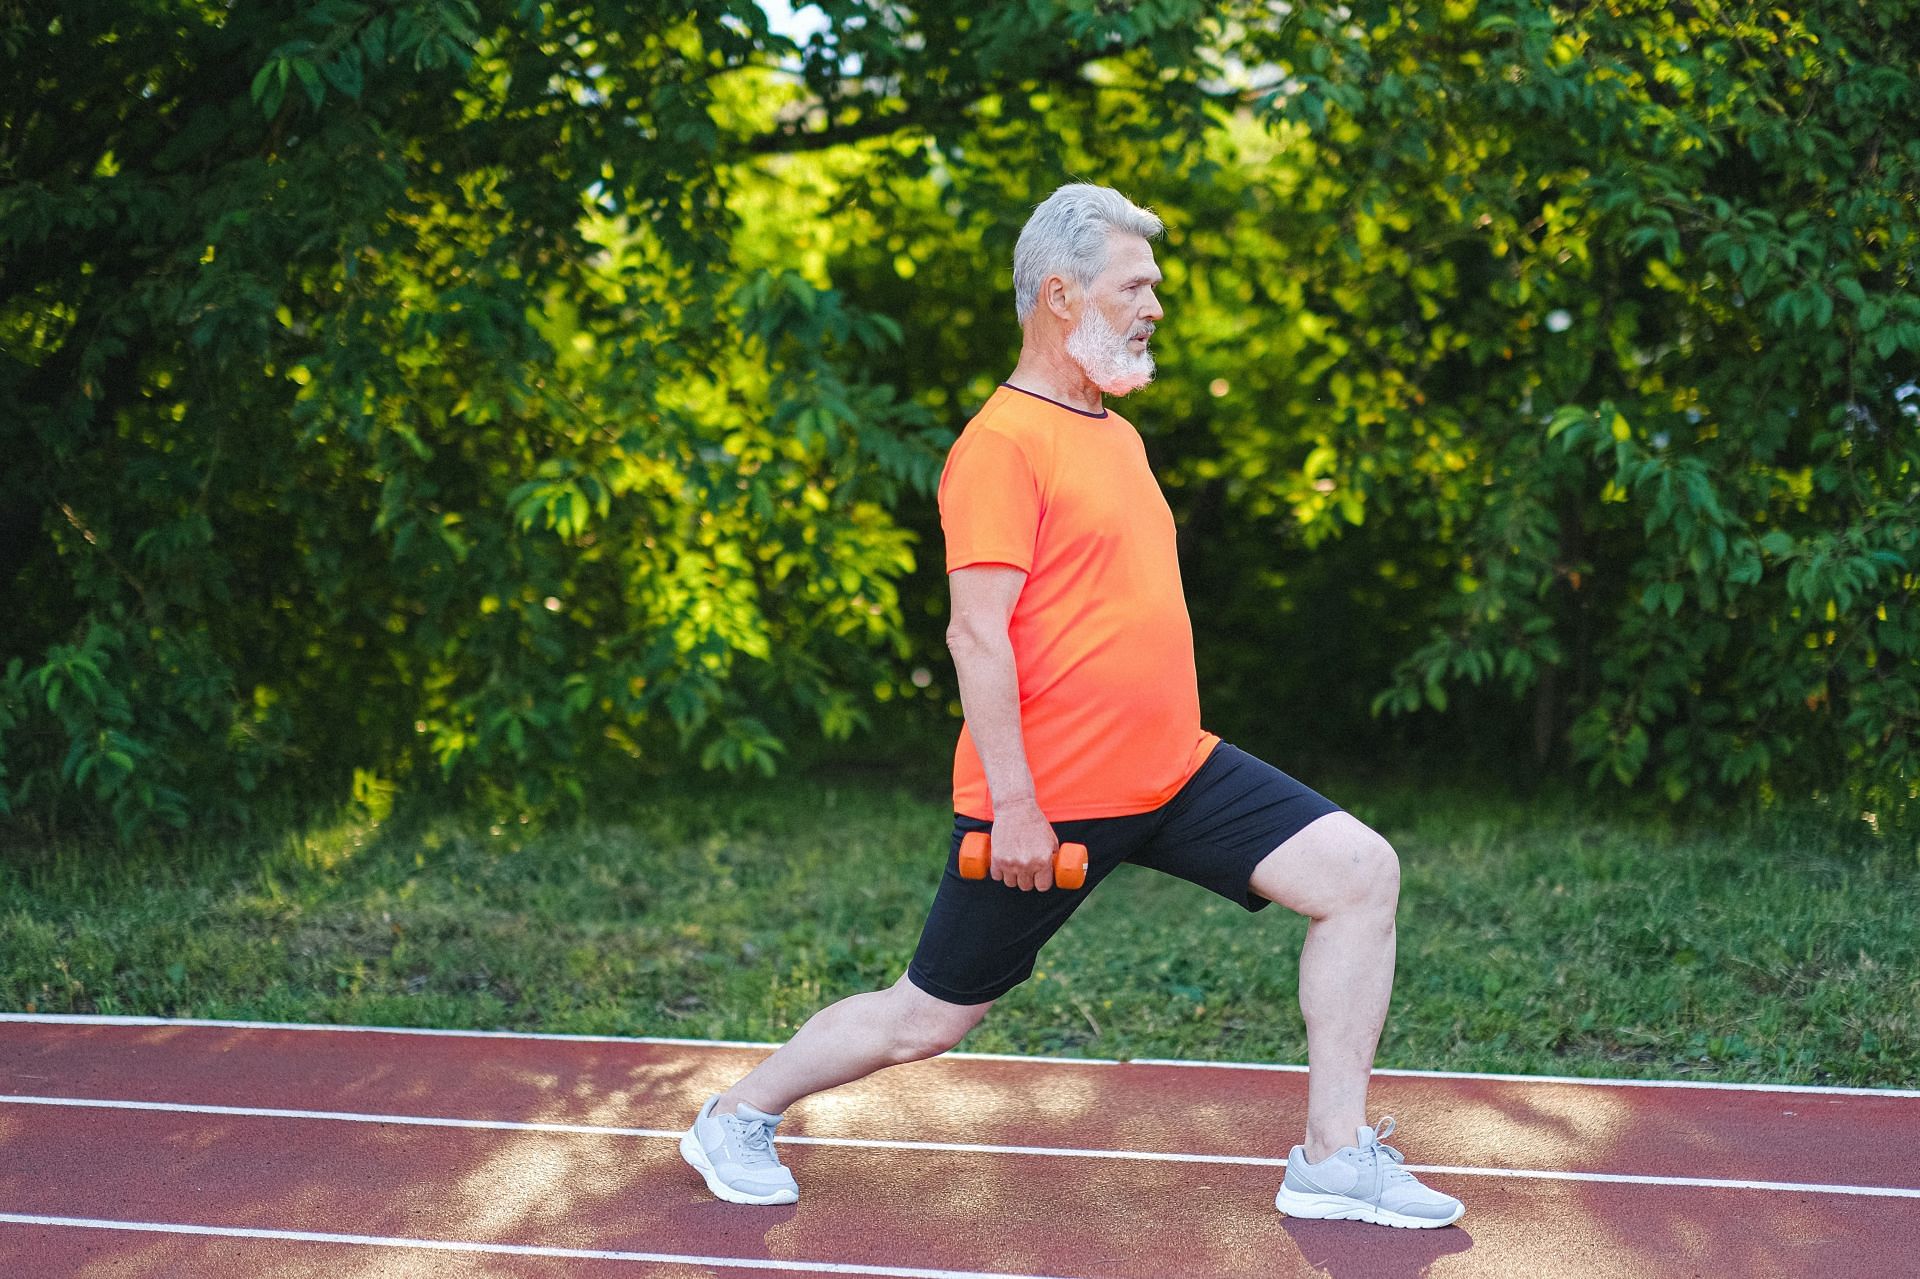 Functional strength training is the best way for seniors to stay fit. (Image via Pexels/Anna Shvets)